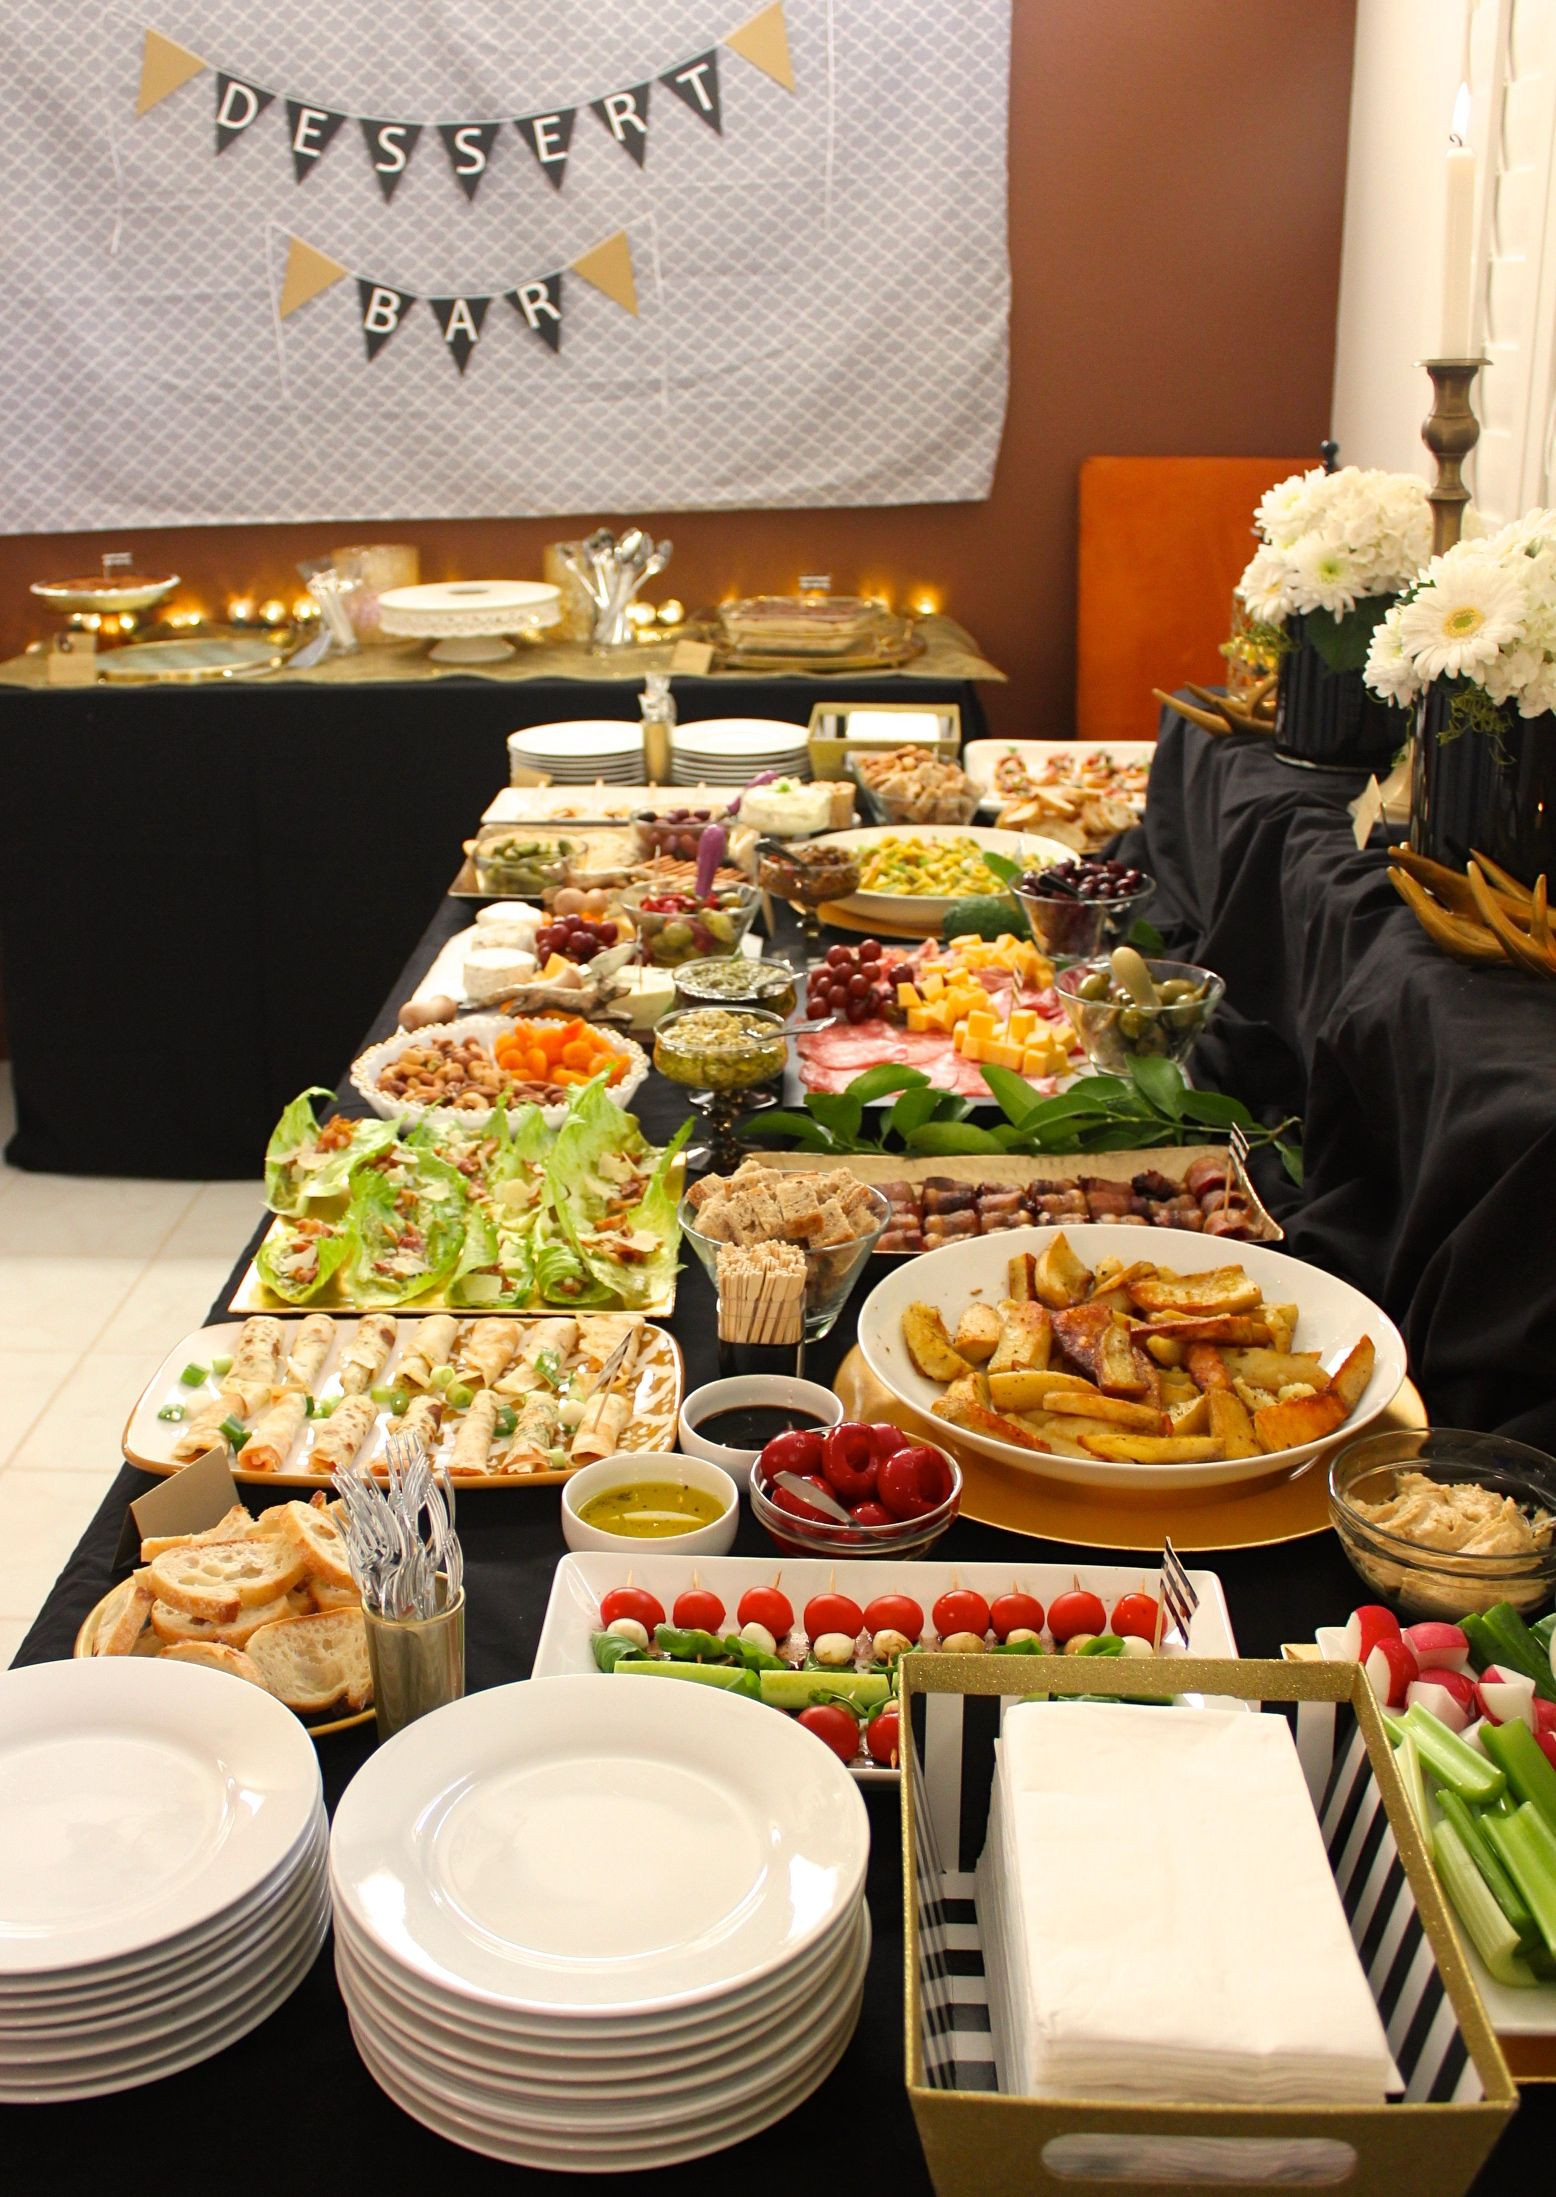 Graduation Party Catering Ideas
 Event Catering Buffet food set up Heavy Appetizers